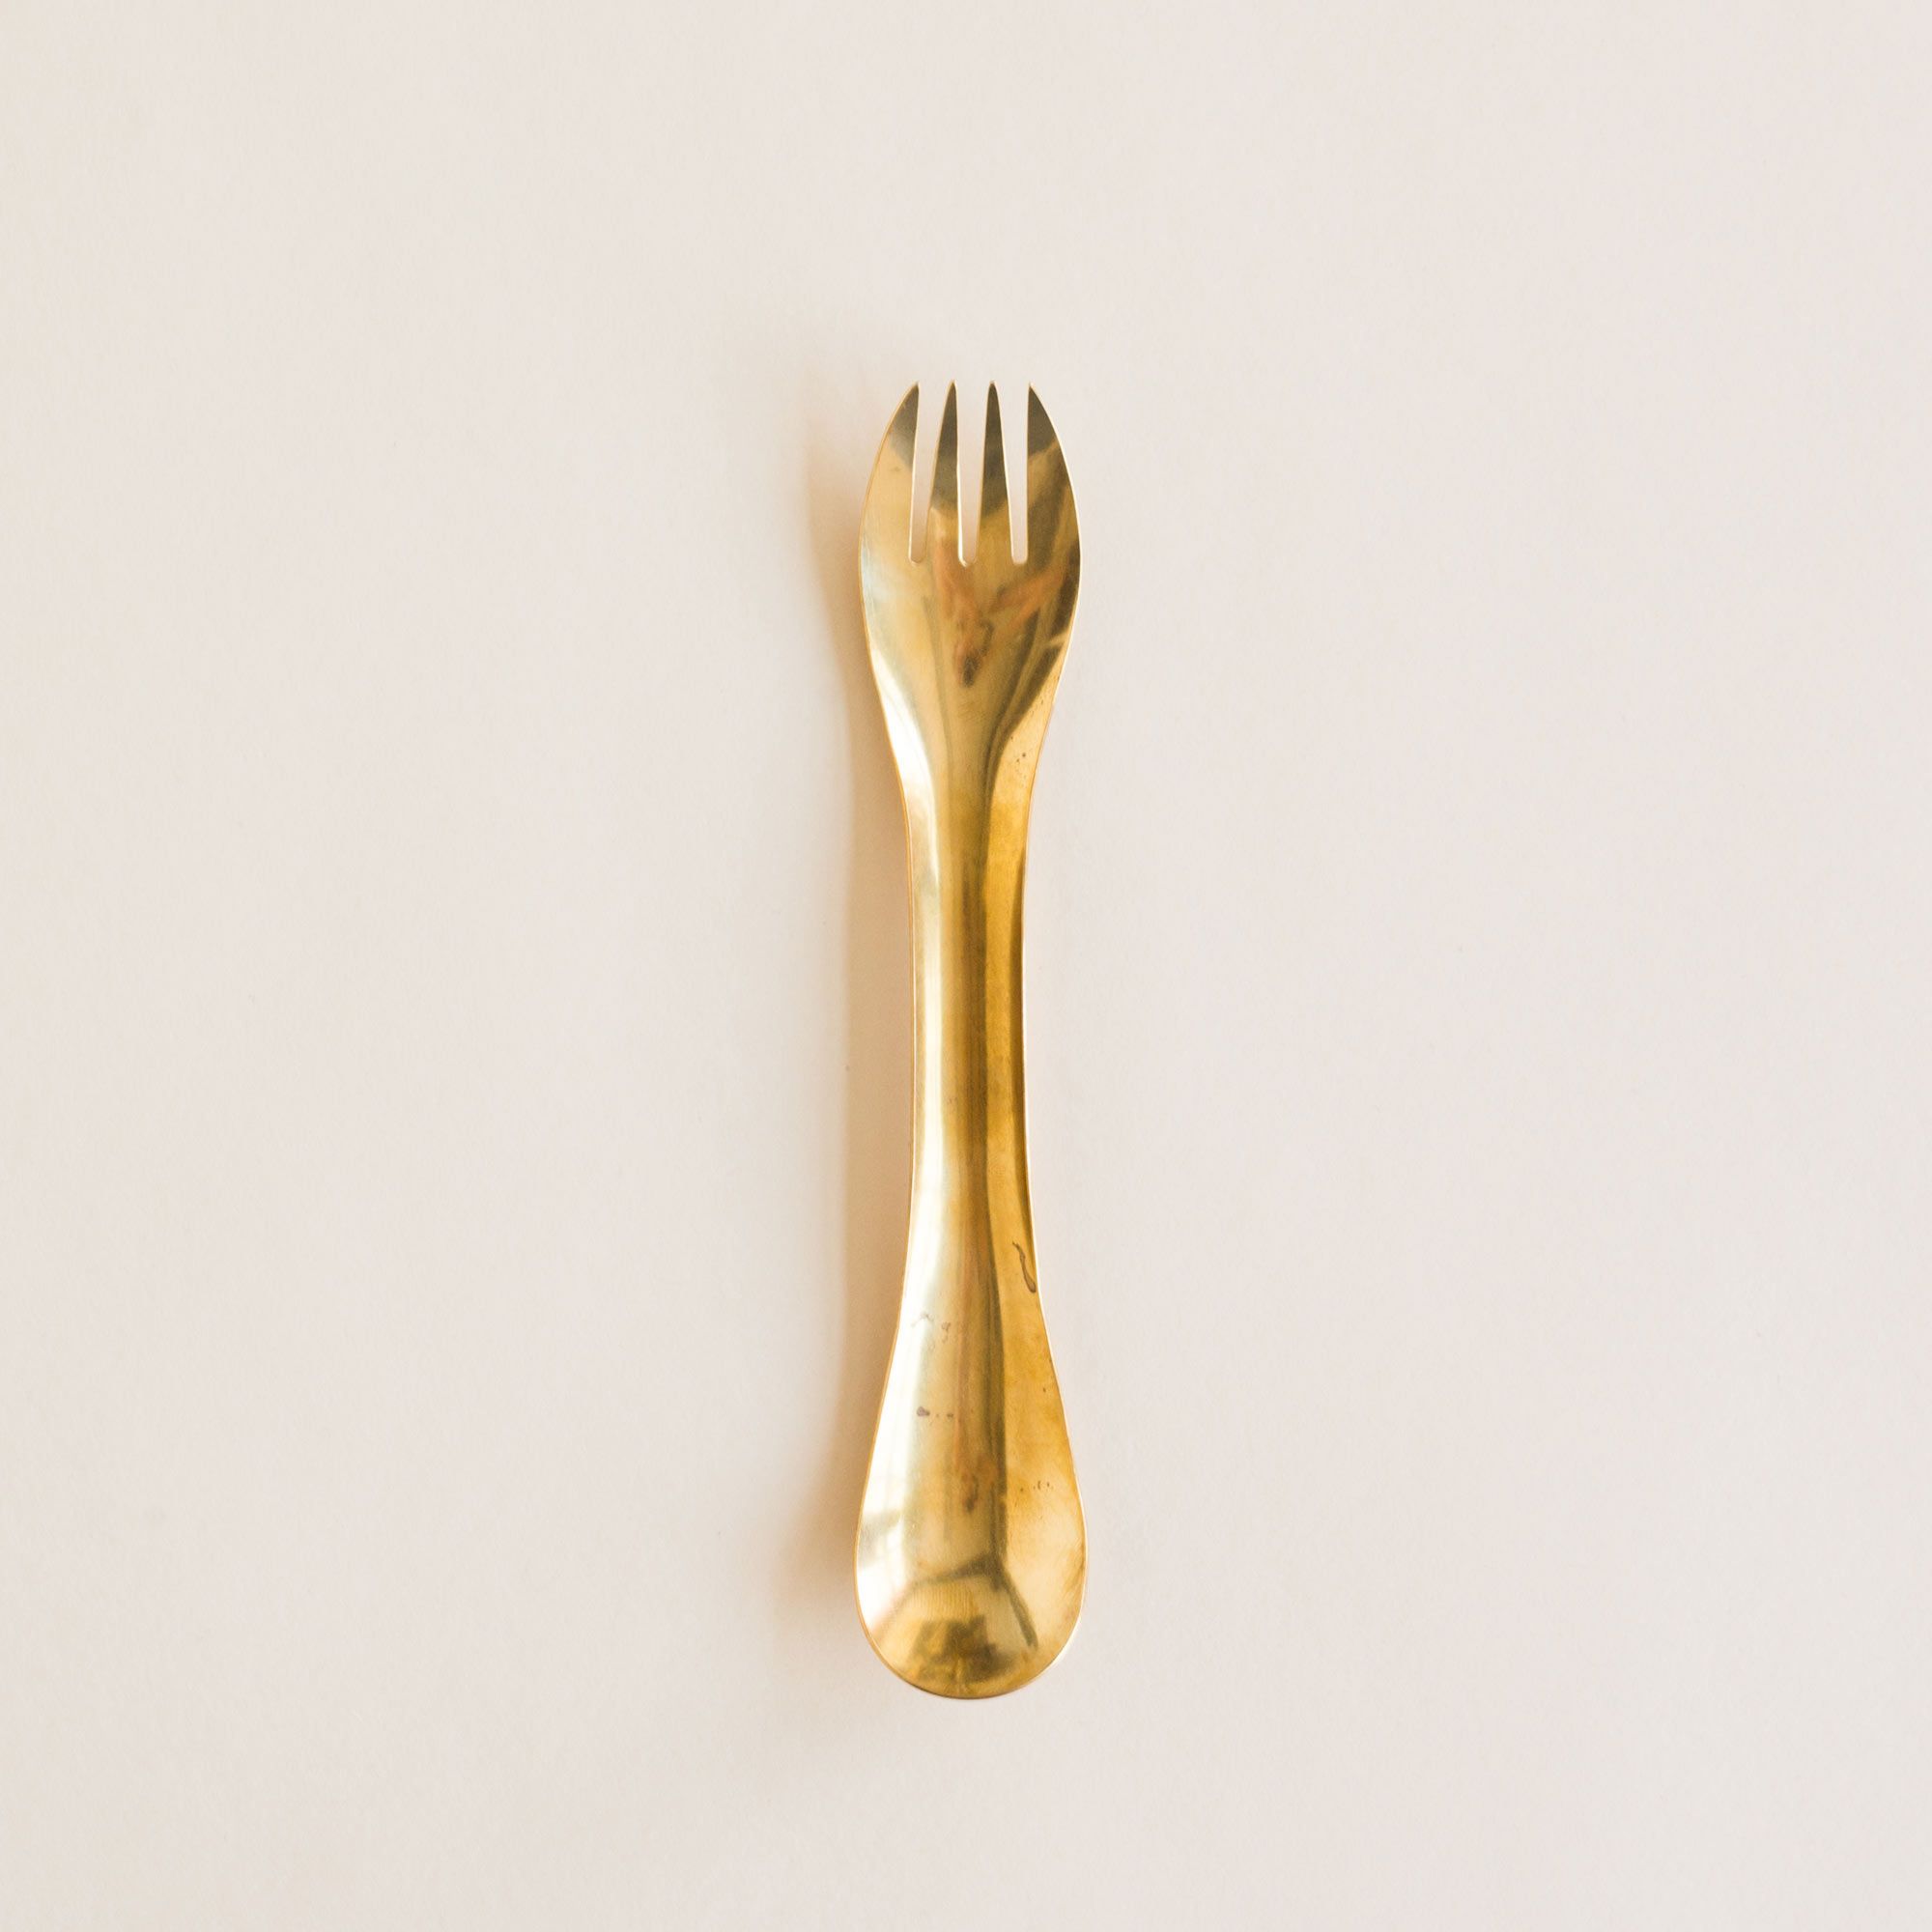 A spork, or eating utensil with spoon at one end and fork at the other, and made of brass